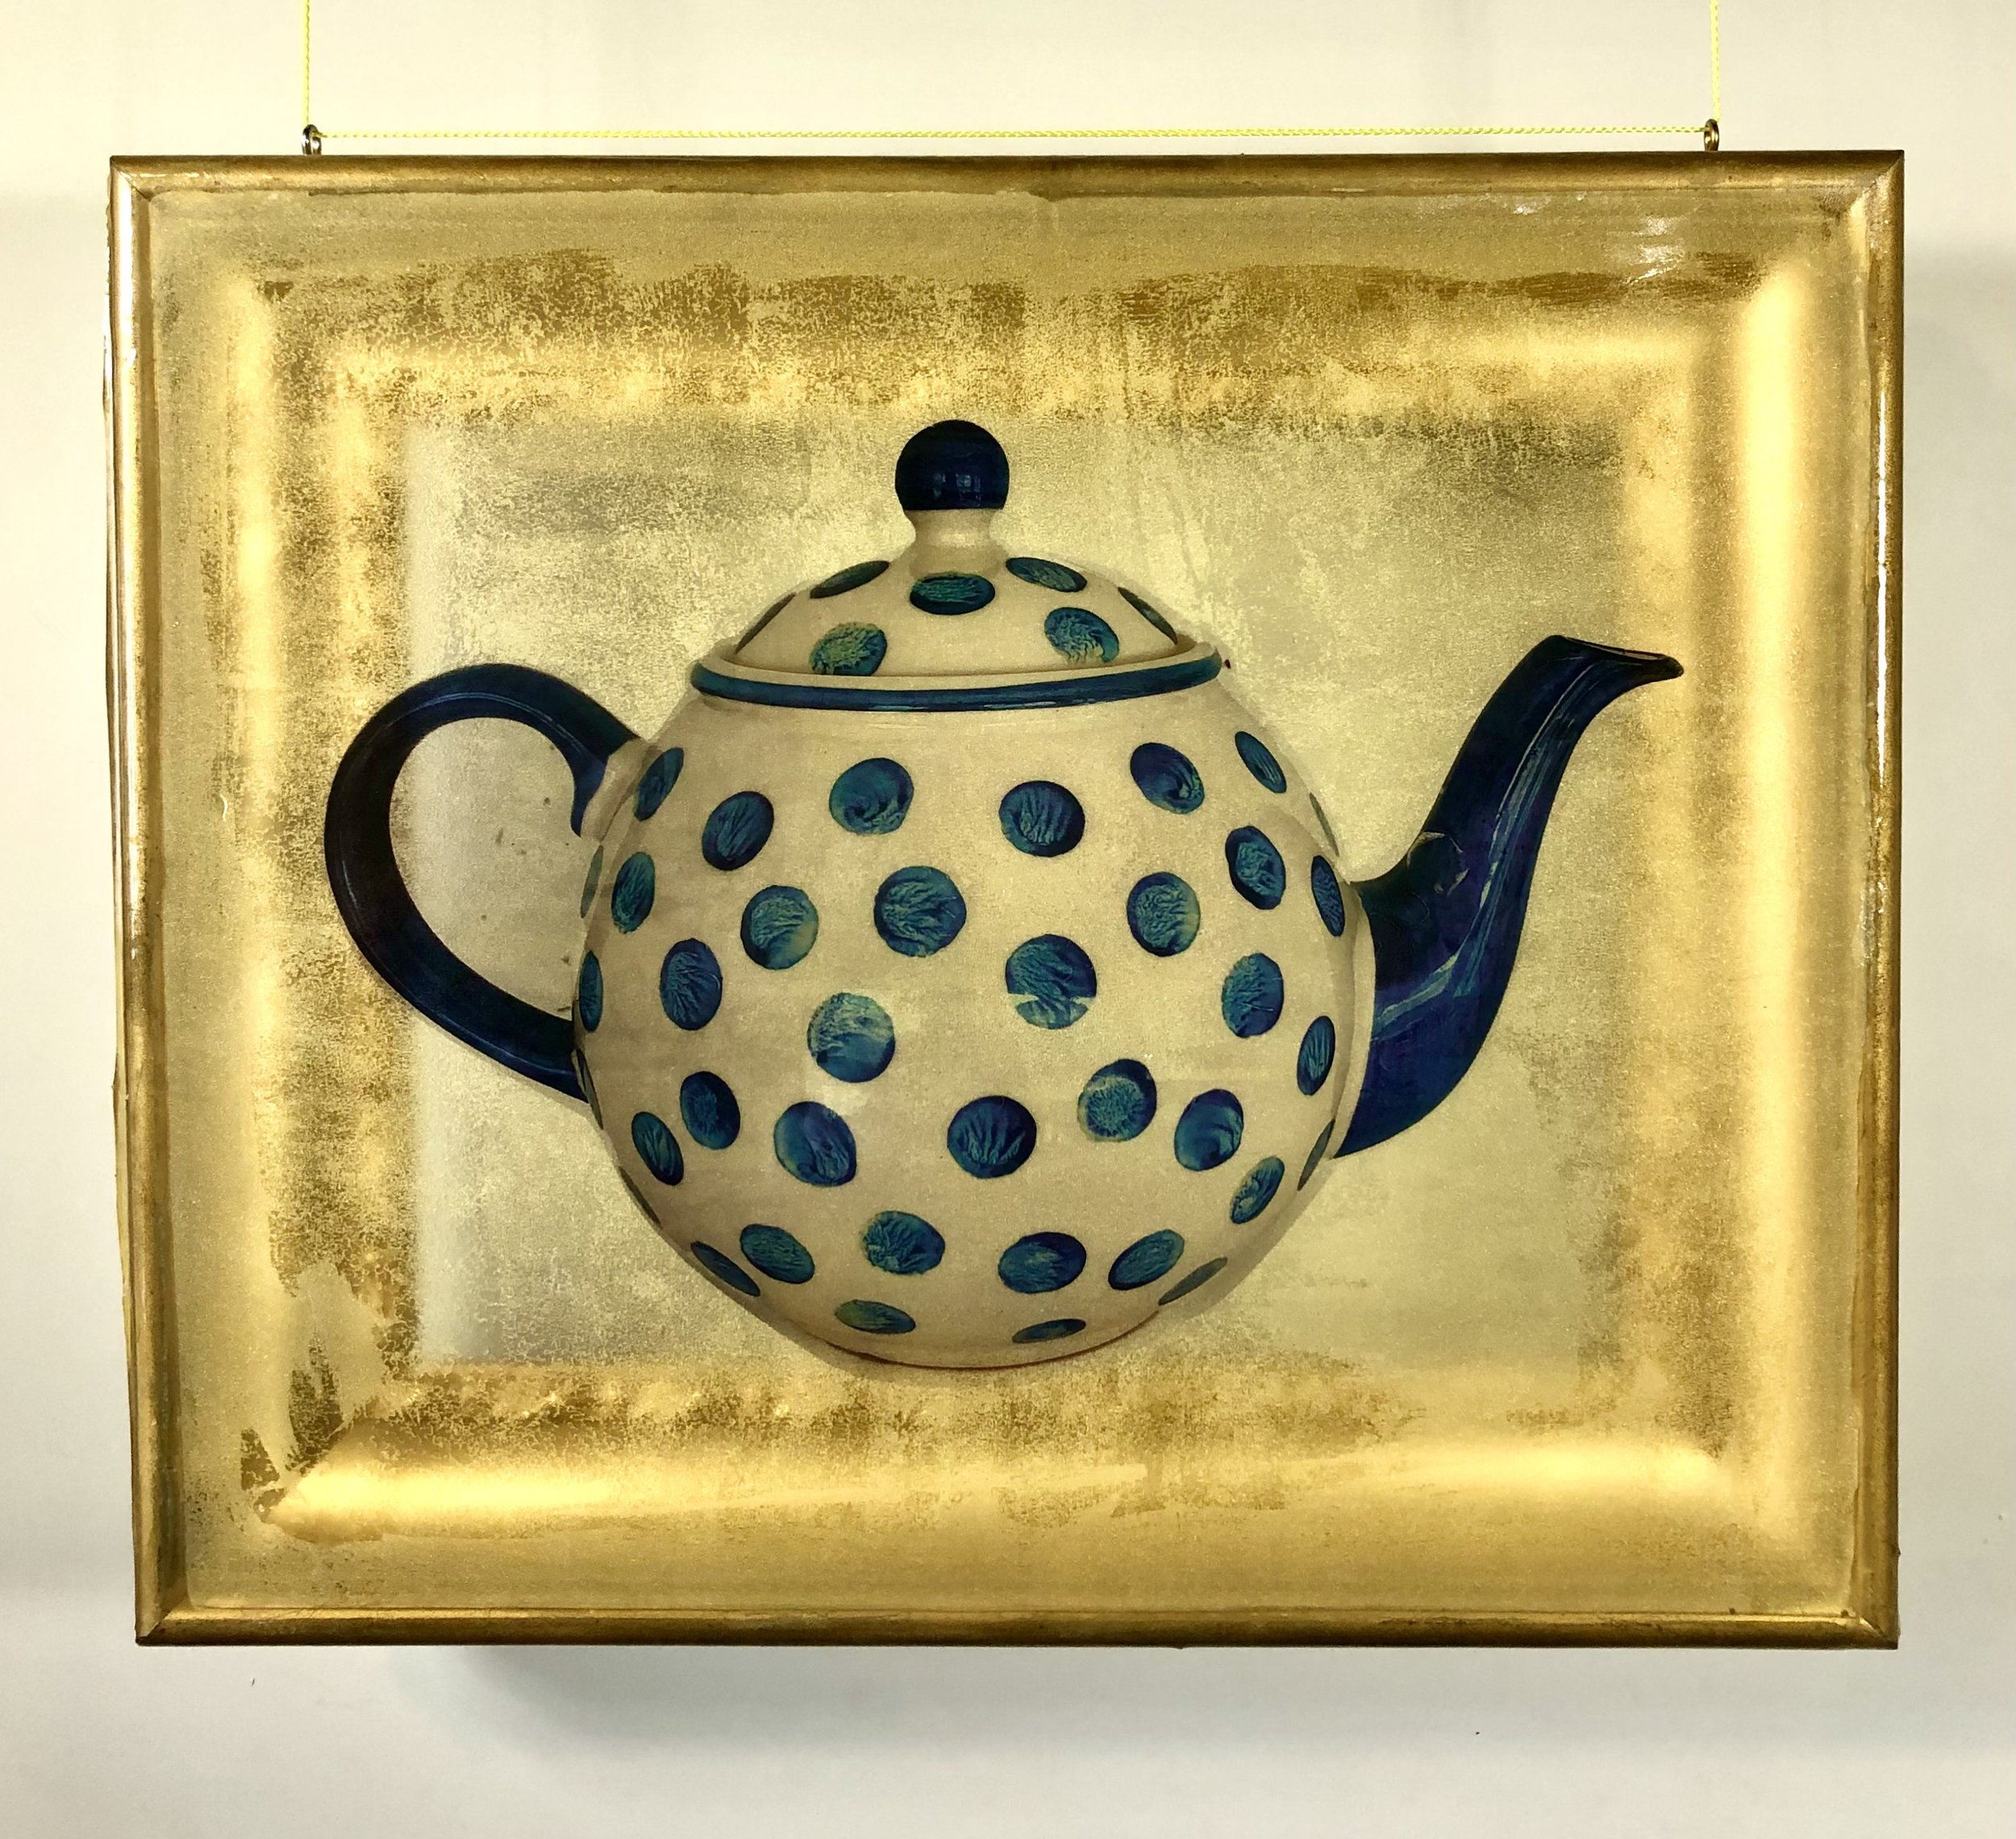    his Polka Dot Teapot was purchased on our honeymoon in British Columbia. On returning, I set a carry-on bag down to be screened at the airport and I heard a small but unmistakable sound of a crack. Now it serves as a delightful sight in an honored